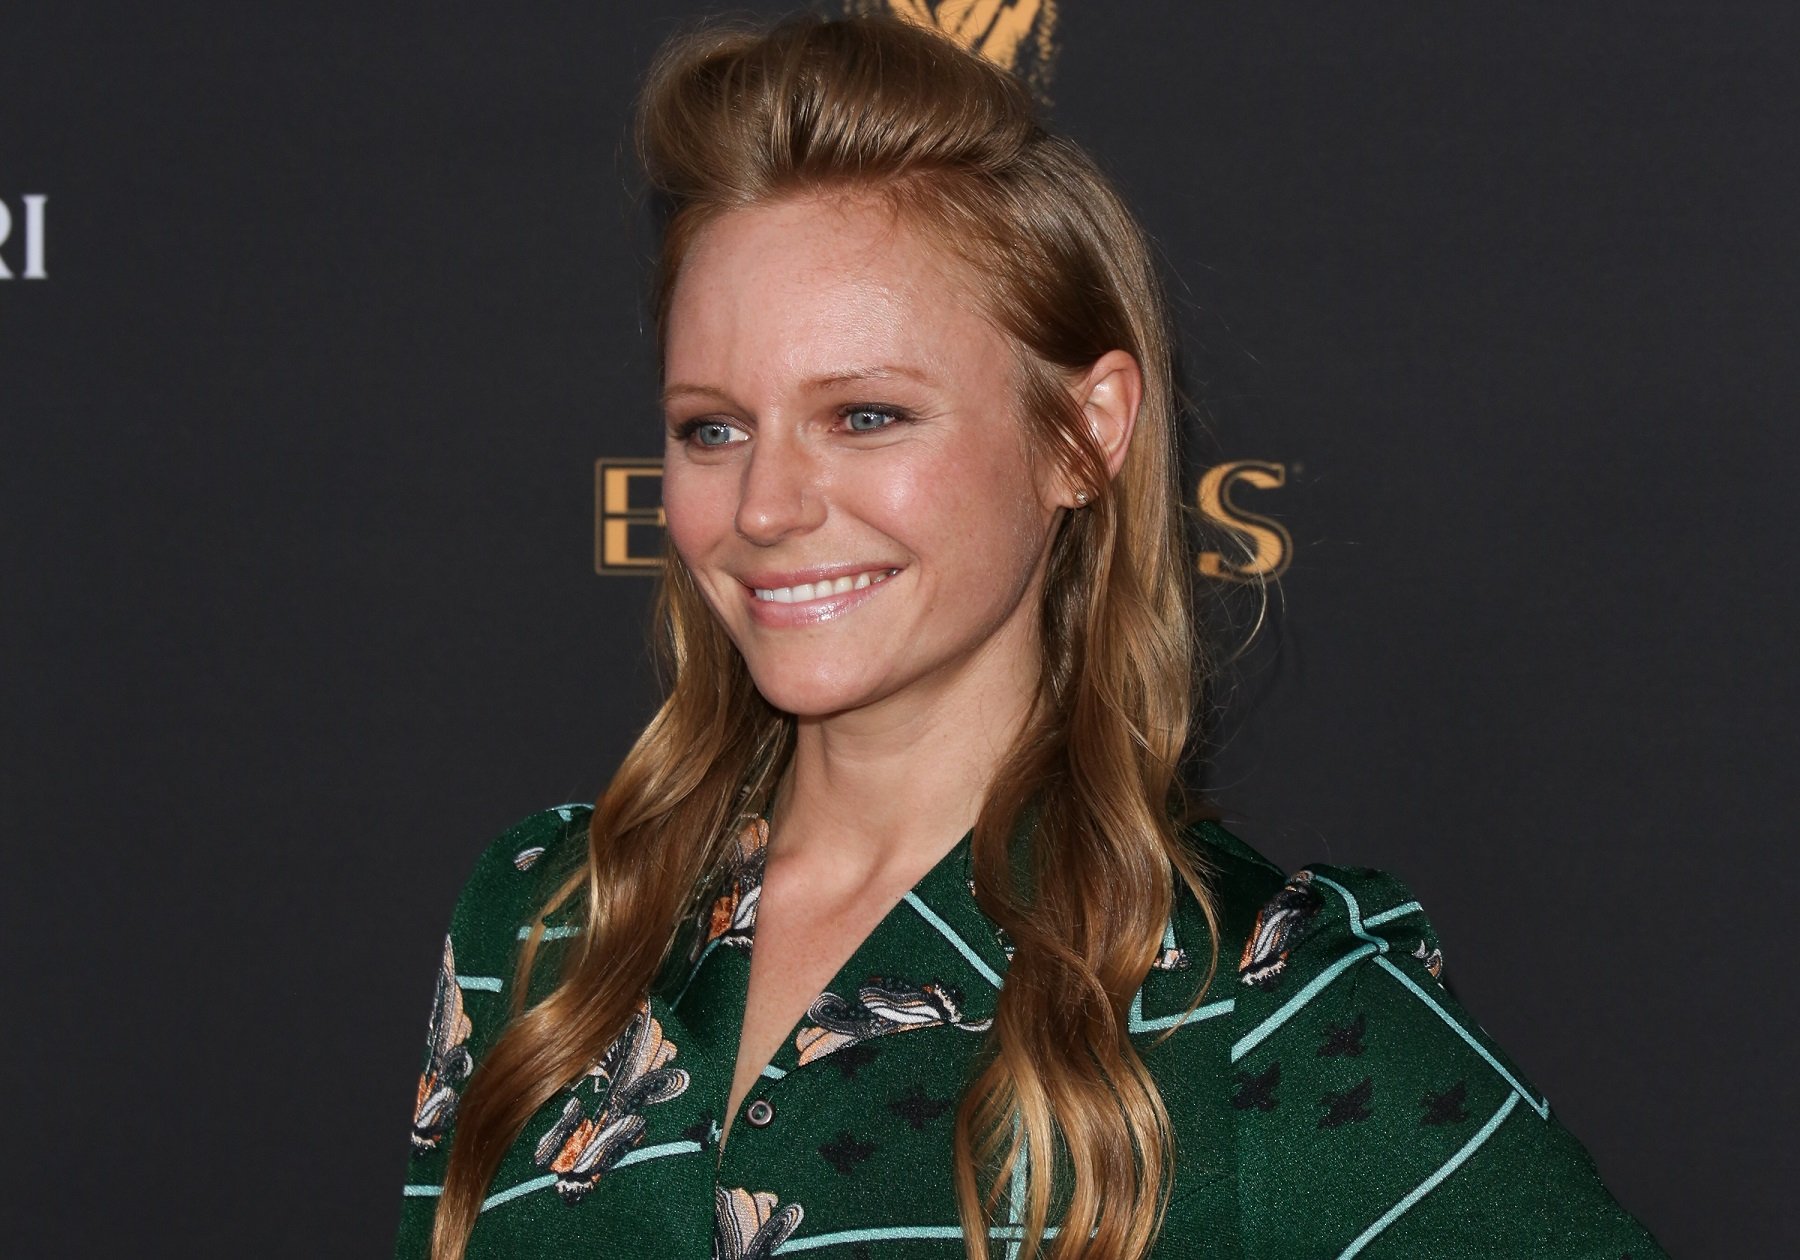 Days of Our Lives star Marci Miller, who plays Abby, in a green checkered dress